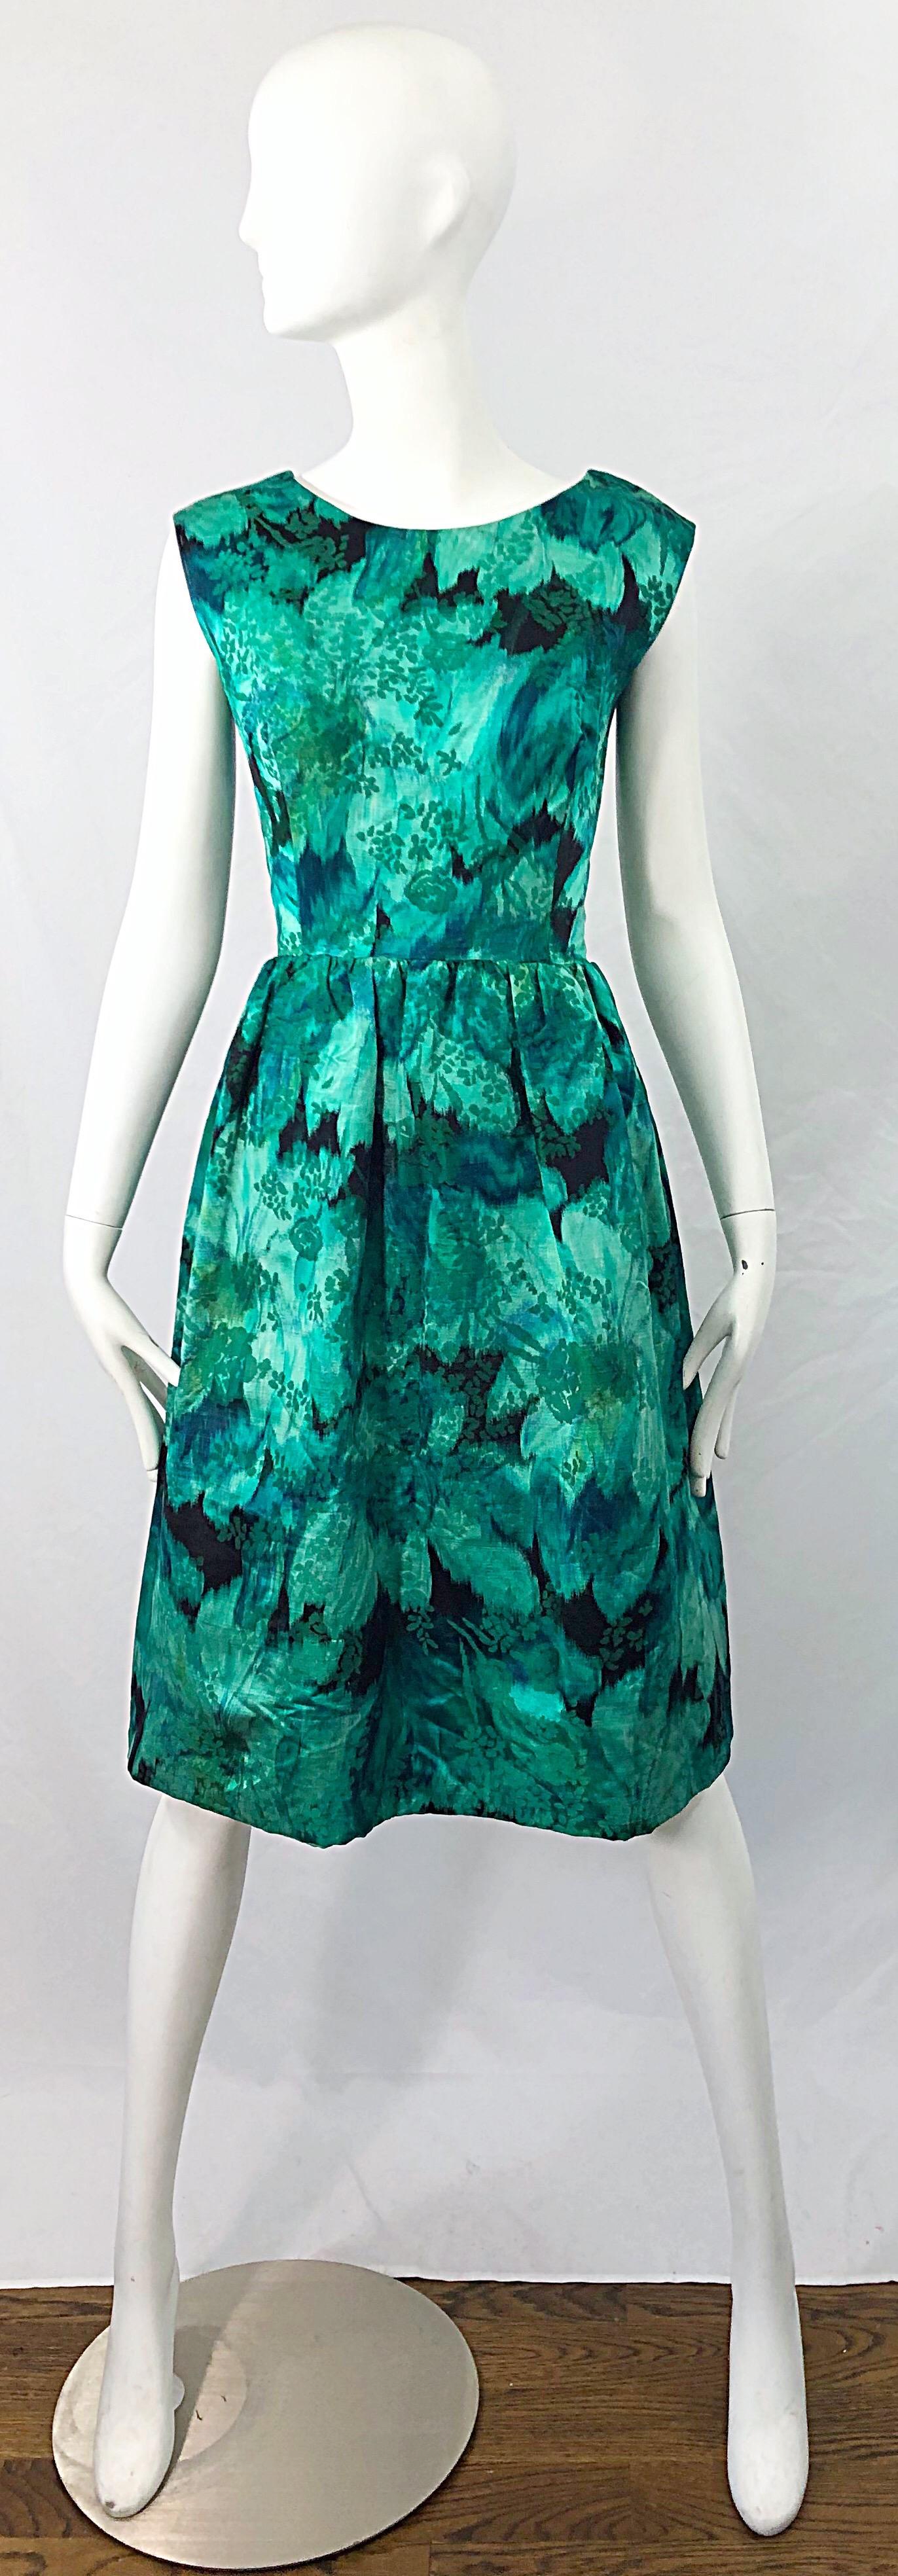 Beautiful 1950s demi couture green botanical floral print silk fit n' flare sleeveless dress ! Features various shade of green throughout. Hidden metal zipper up the back with hook-and-eye closure. Can easily be worn for any day or evening event.